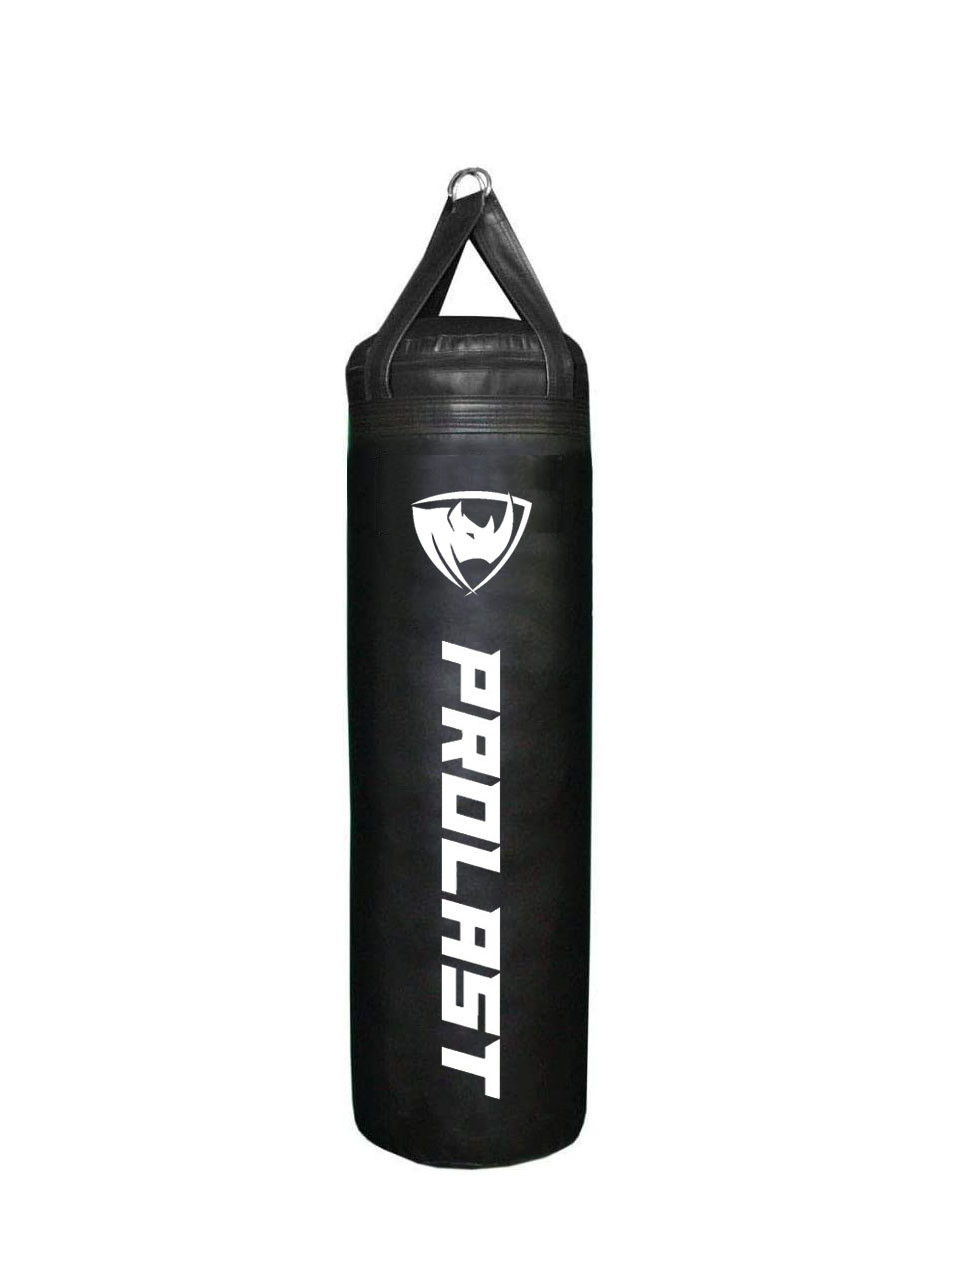 Professional Boxing 80 lbs Heavy Punching Bag MADE IN USA